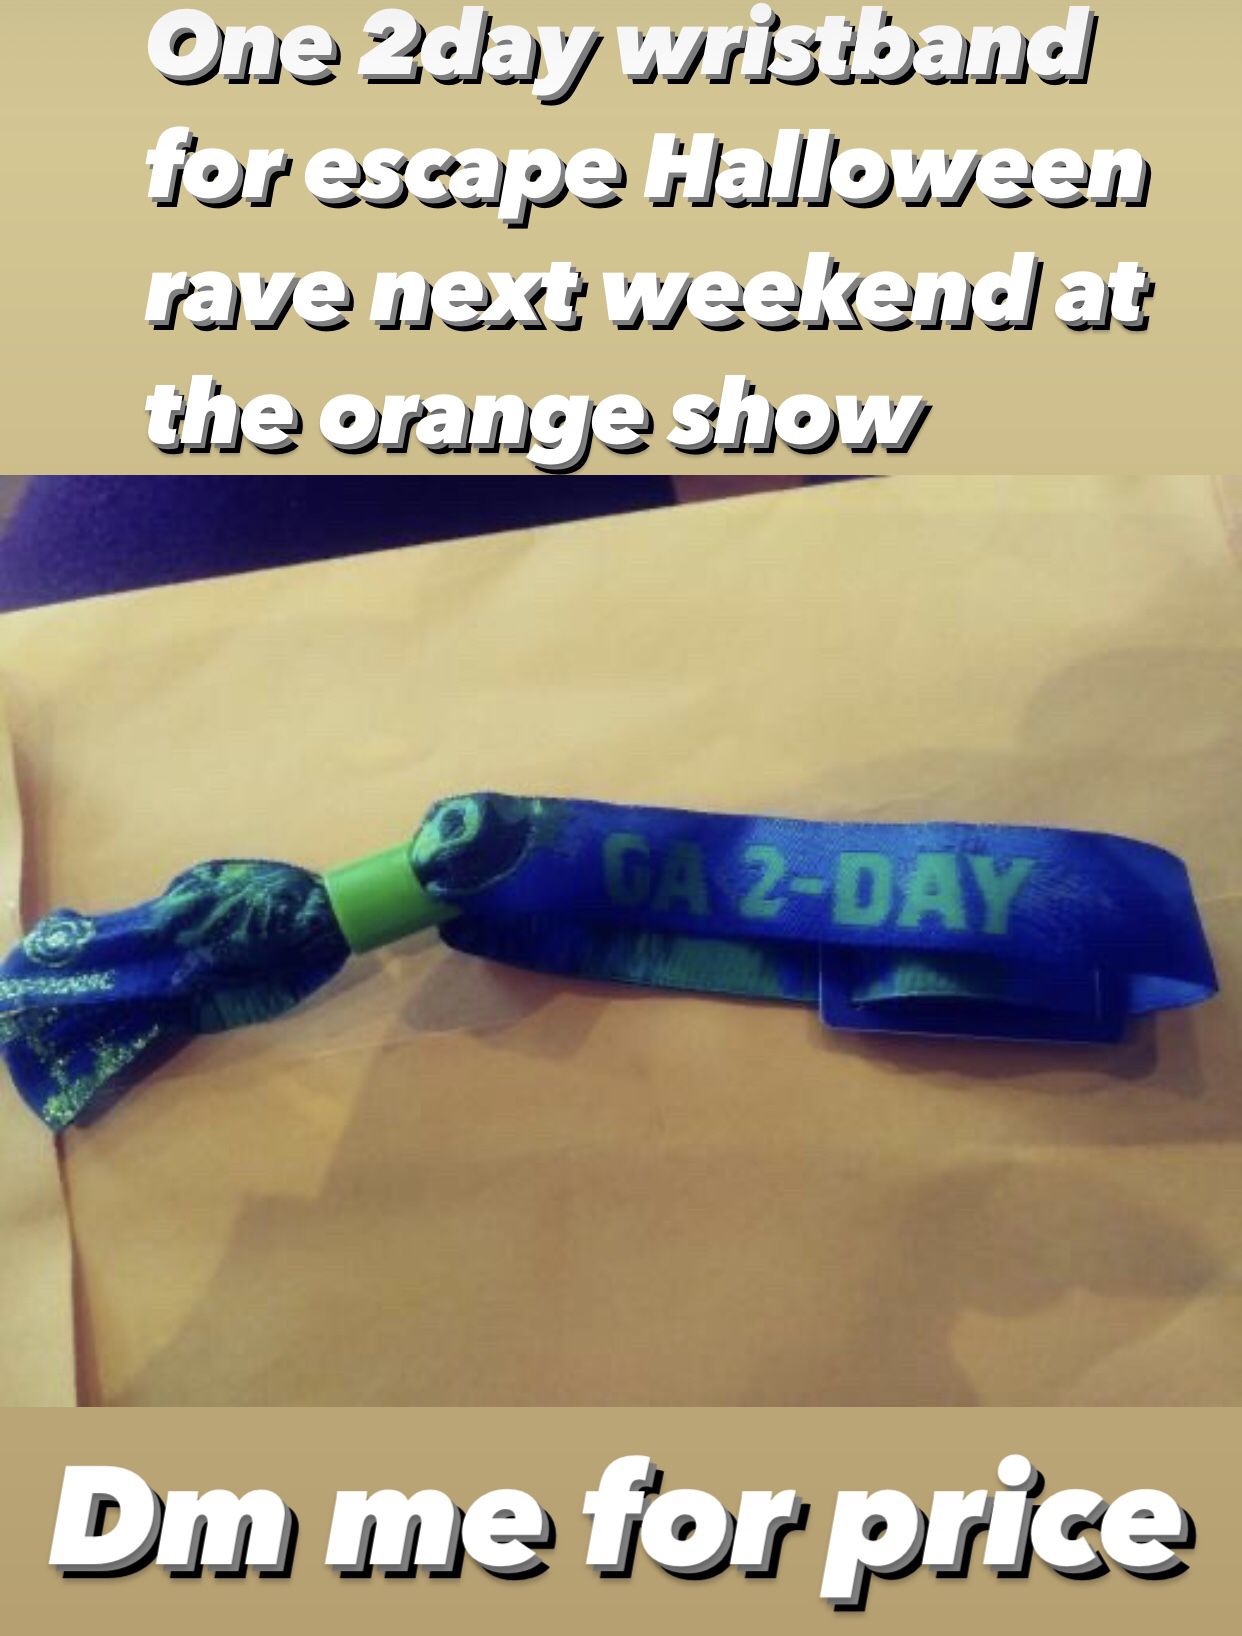 Escape Halloween Rave 2 Day Wrist Band 